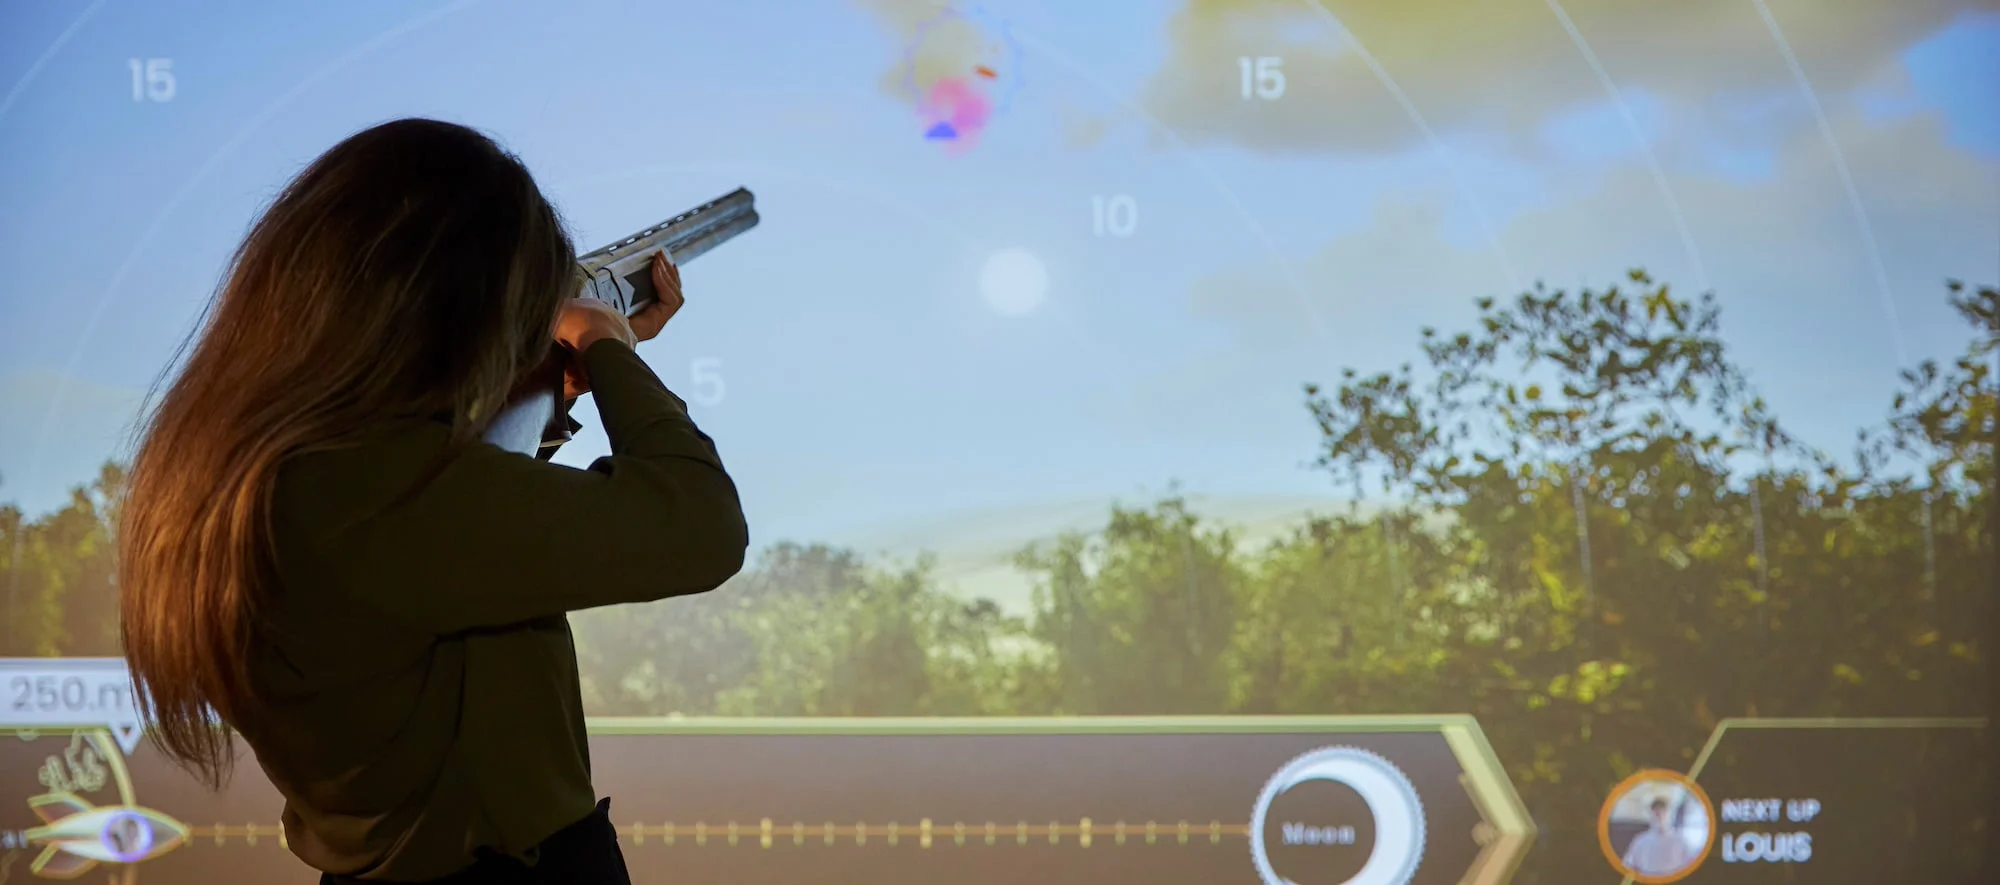 clay shooting games online free